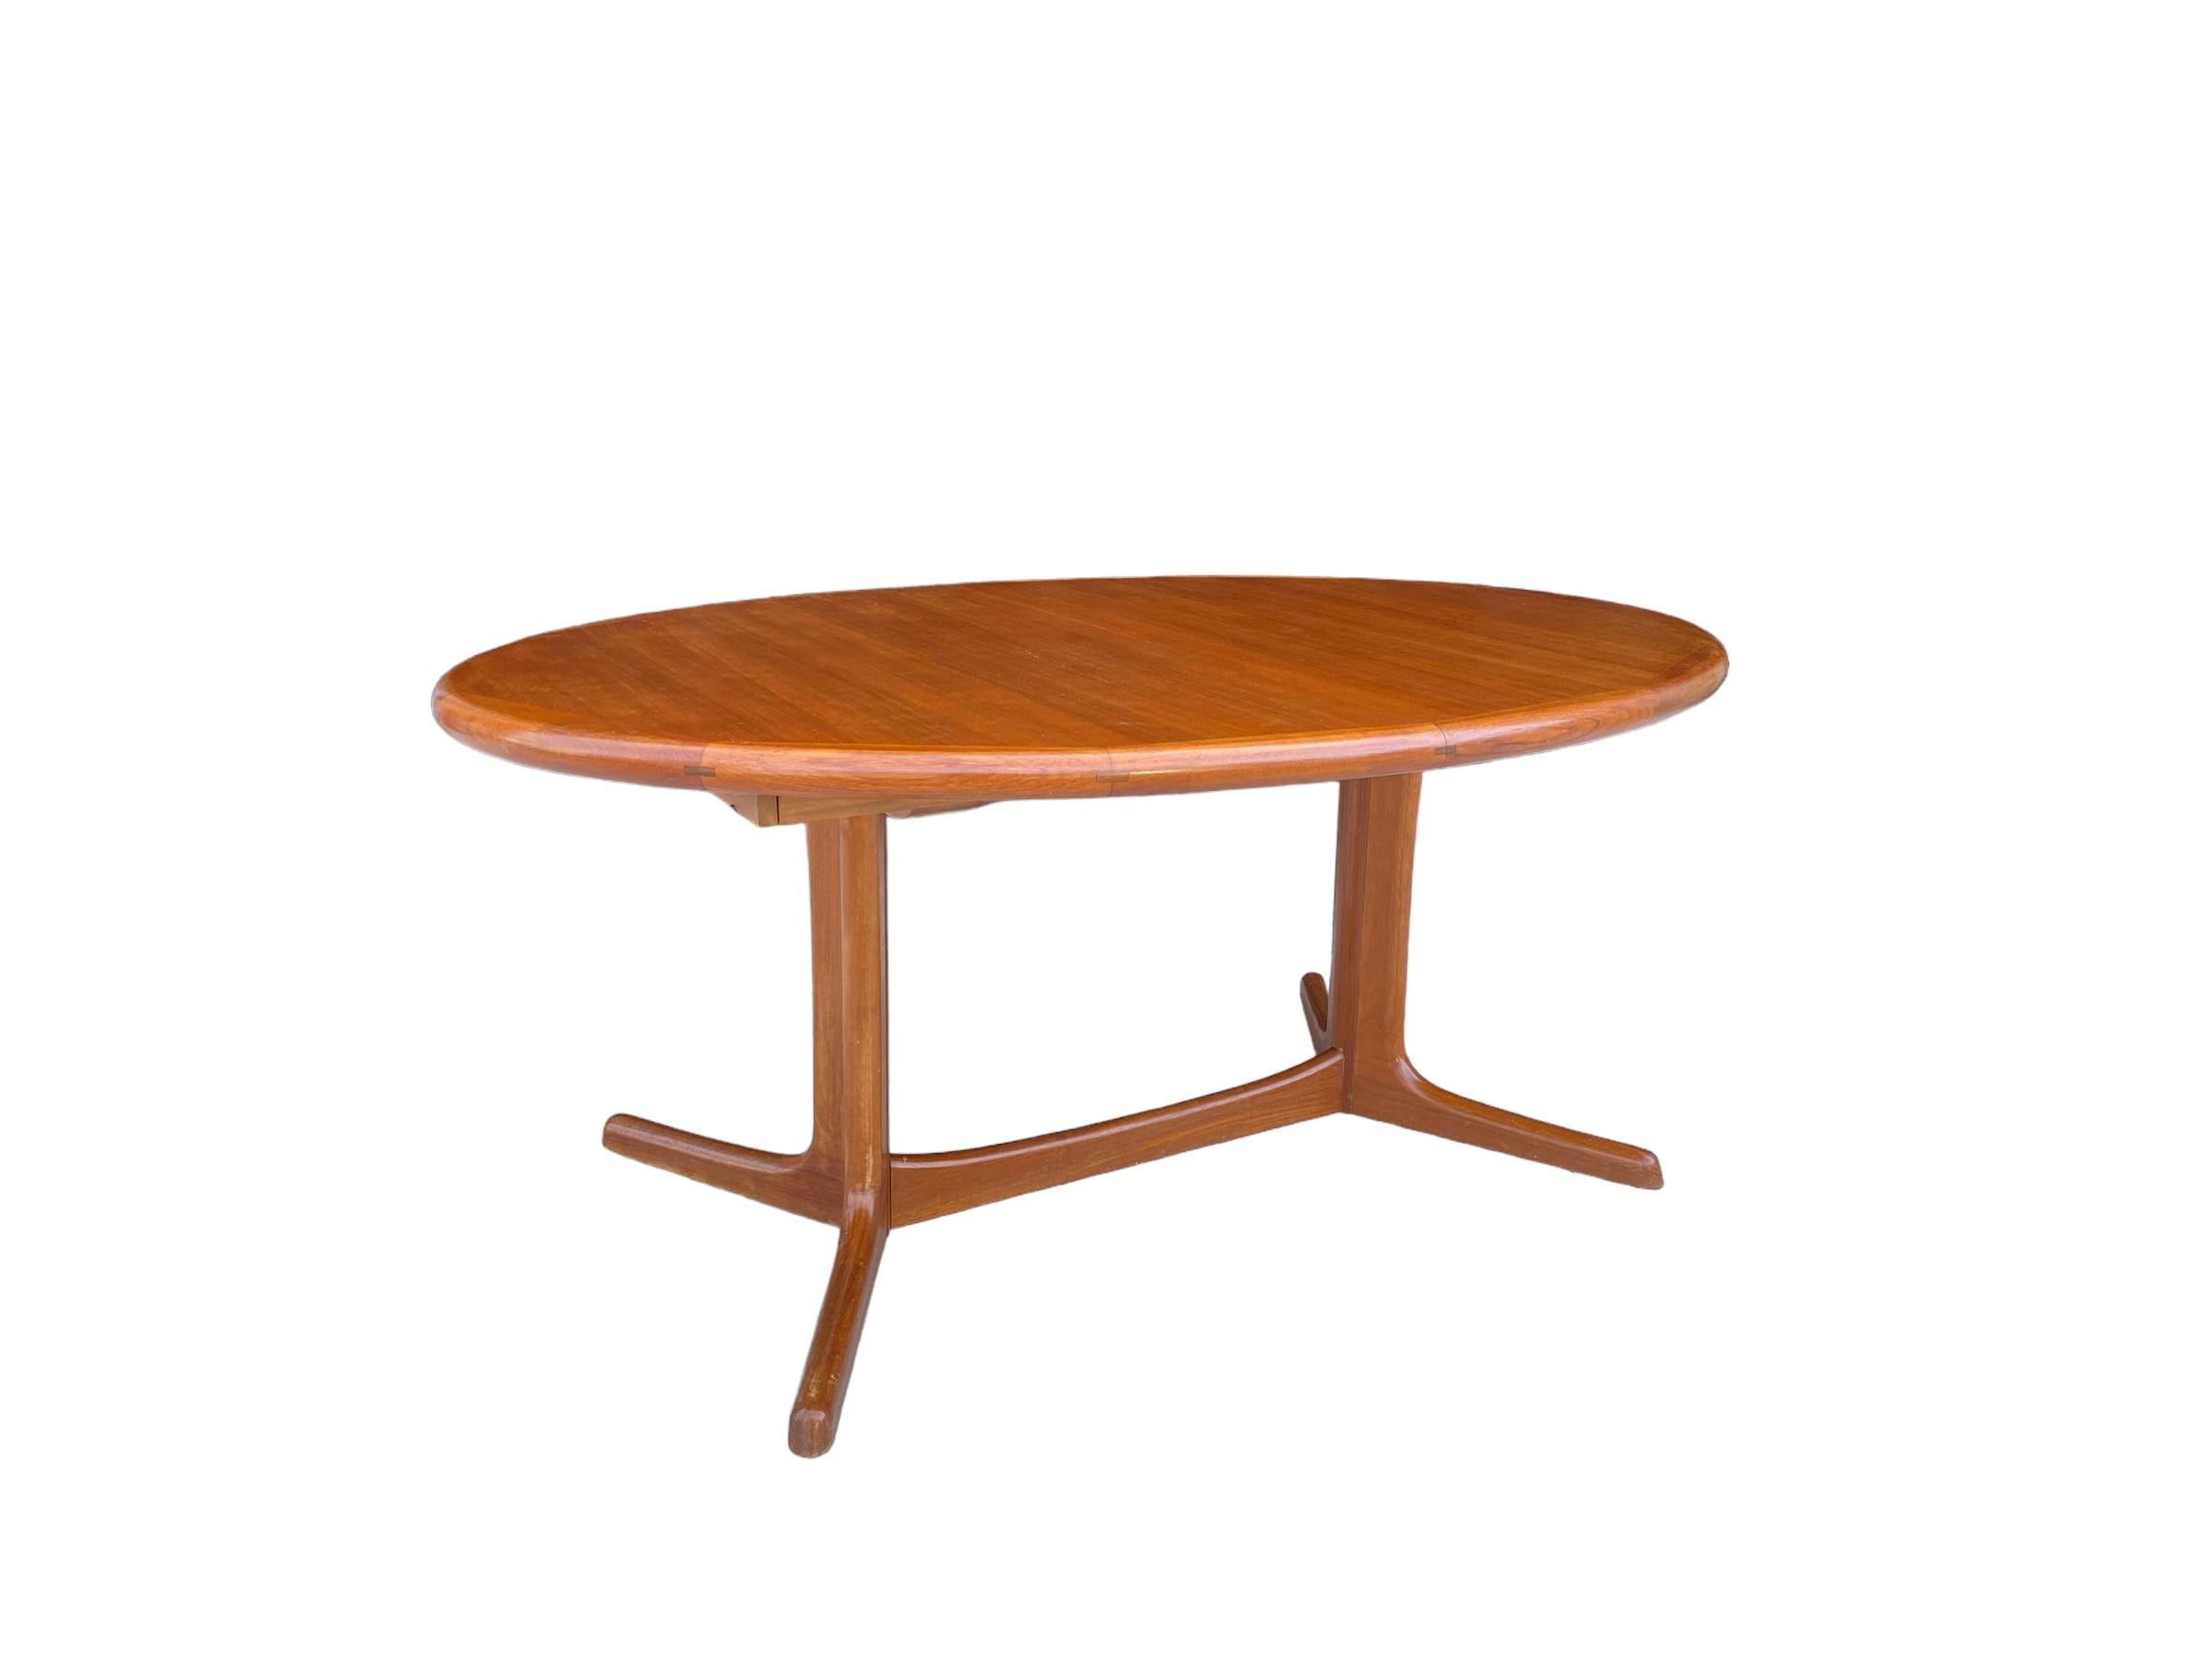 Danish Teak dining table by Dyrlund. This oval table features old growth teak grain and rich color. The tapered oval end and banded edges add a touch of elegant design. Two leaves can extend the table to a maximum of 100 inches. Excellent example of